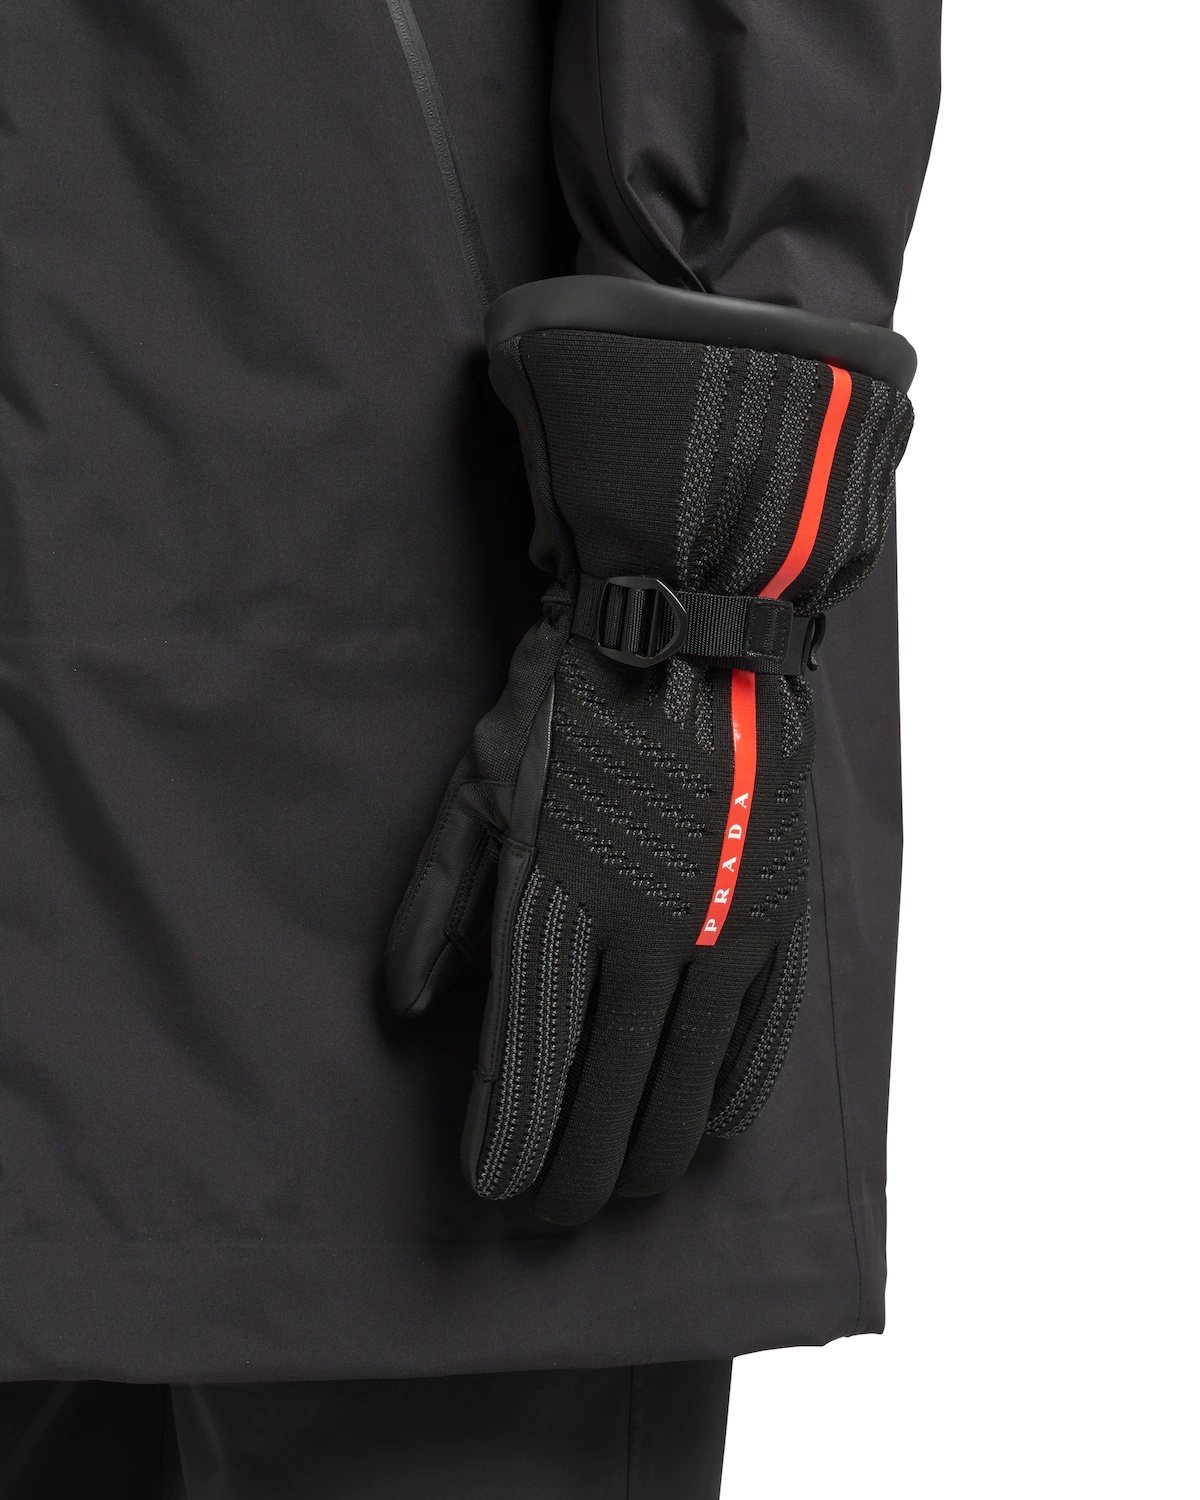 GORE-TEX, leather and knit ski gloves - 2